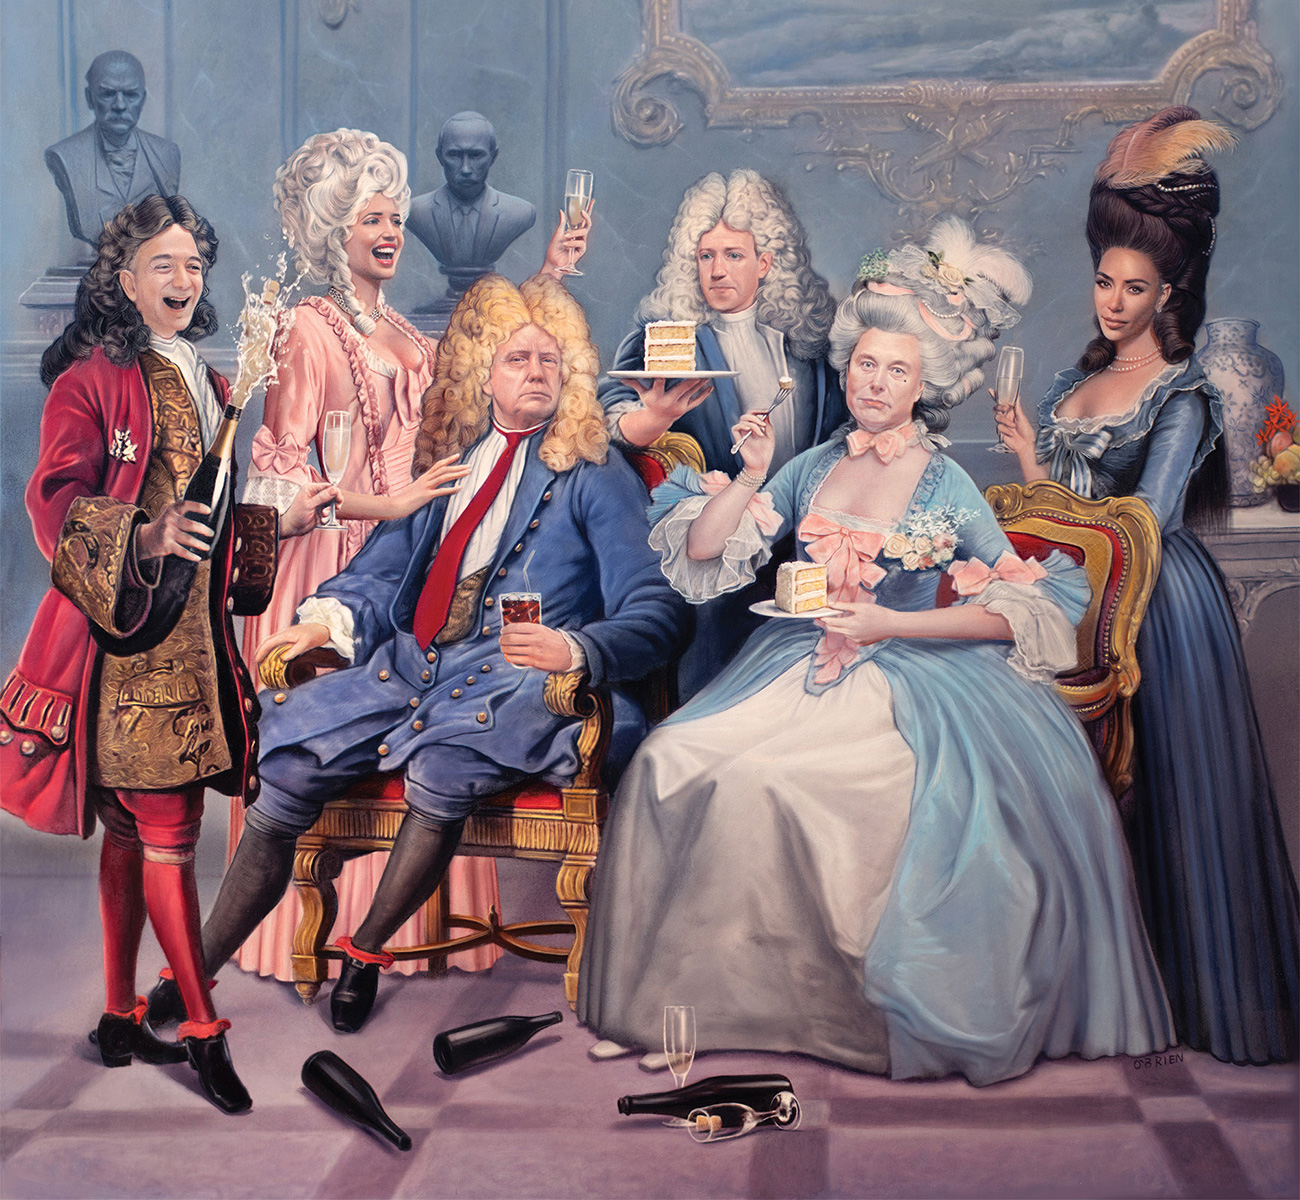 A painting of famous American celebrities dressed as French aristocrats. From left: Jeff Bezos, Ivanka Trump, Donald Trump, Mark Zuckerberg, Elon Musk, and Kim Kardashian. Elon Musk is dressed like Marie Antoinette and eating cake.